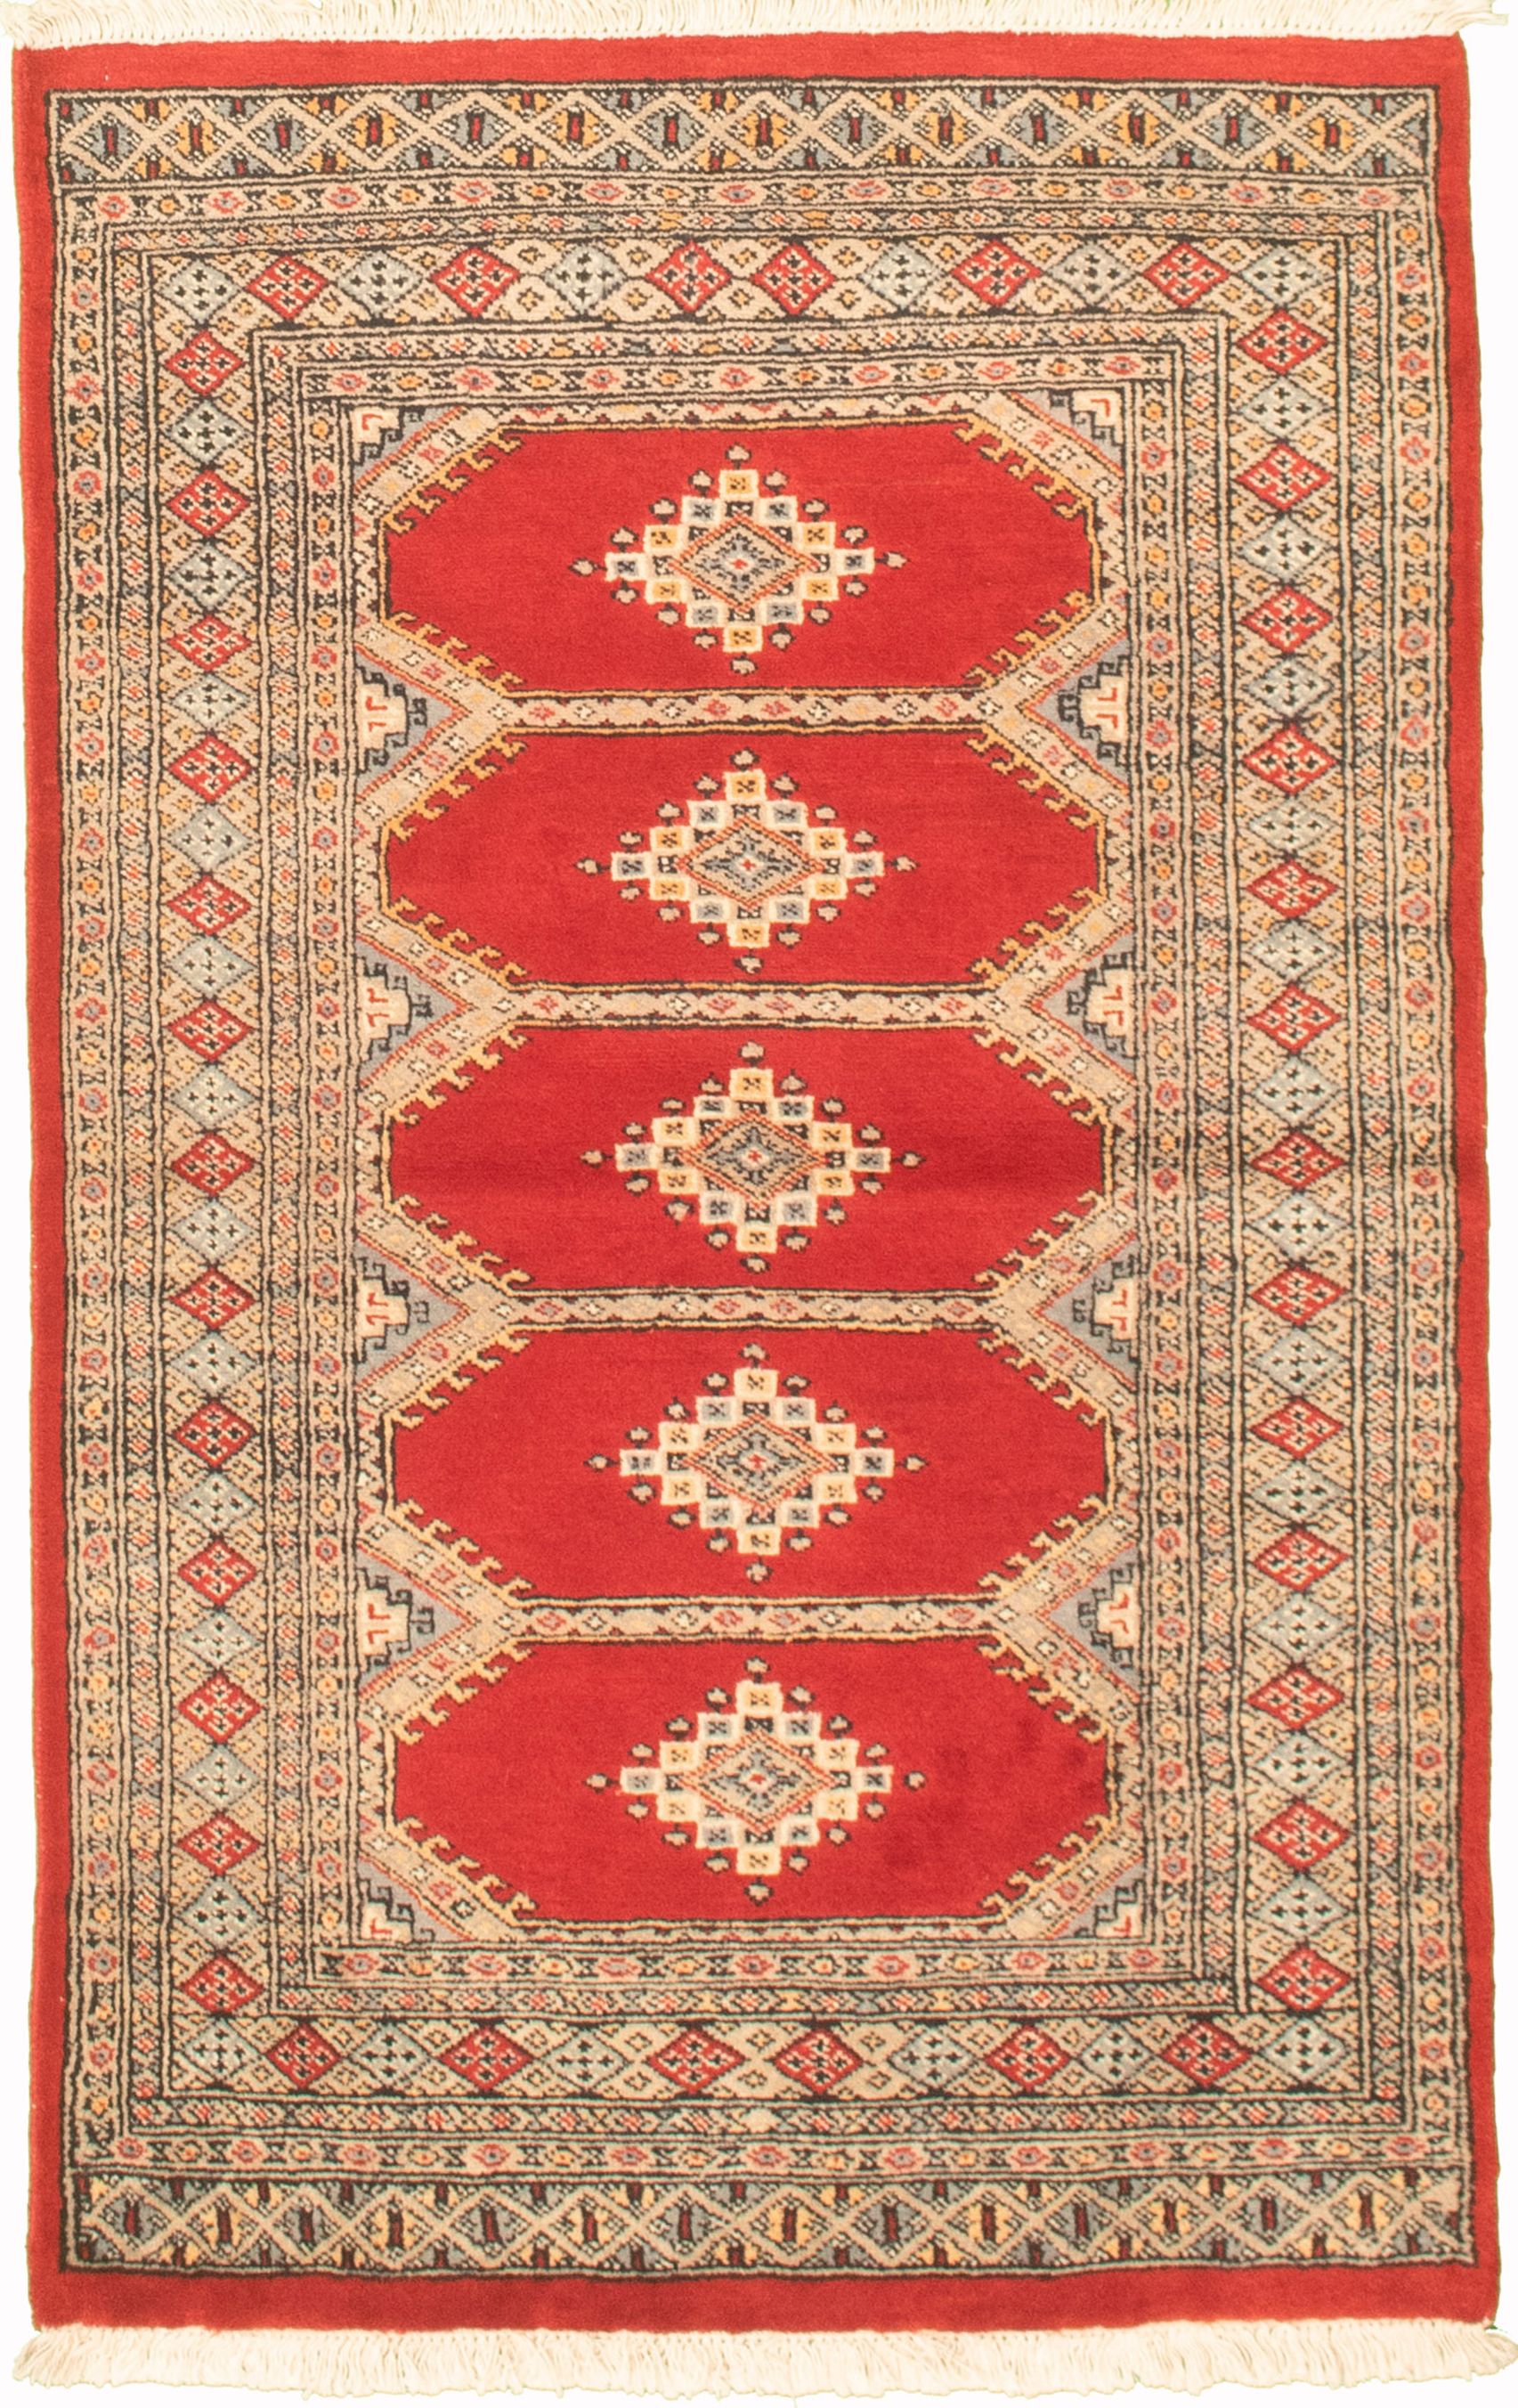 Hand-knotted Finest Peshawar Bokhara Red Wool Rug 3'2" x 5'1"  Size: 3'2" x 5'1"  